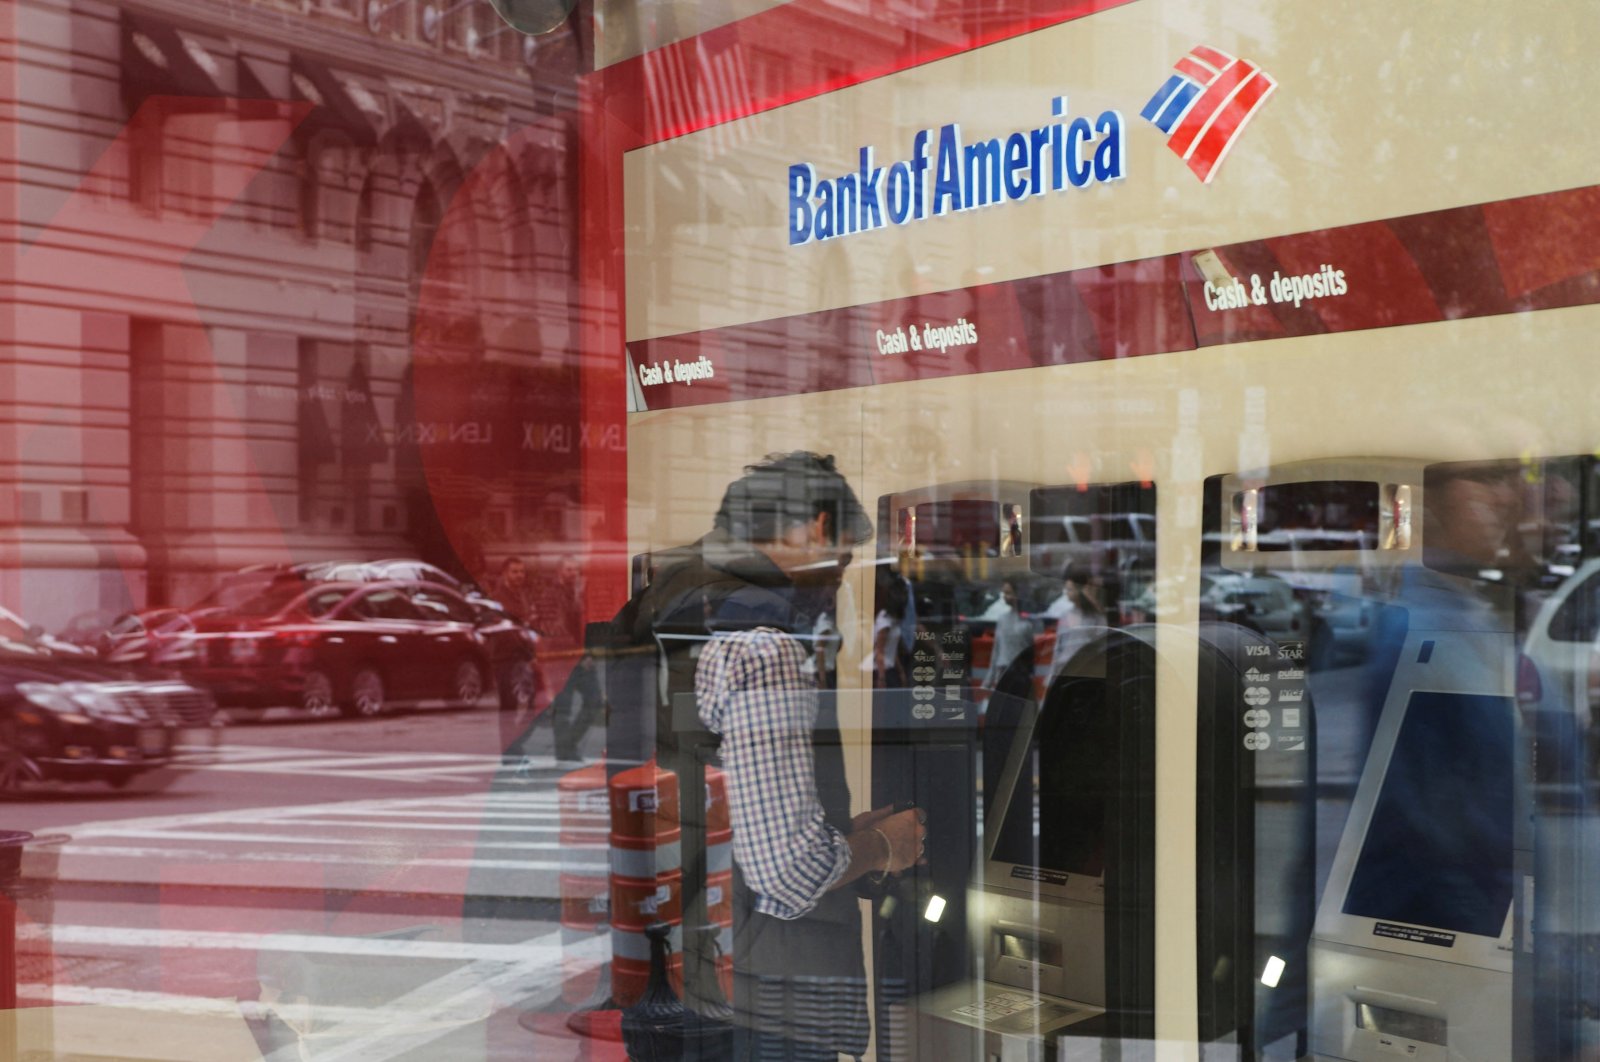 A customer uses an ATM at a Bank of America branch in Boston, Massachusetts, U.S., Oct. 11, 2017. (Reuters Photo)